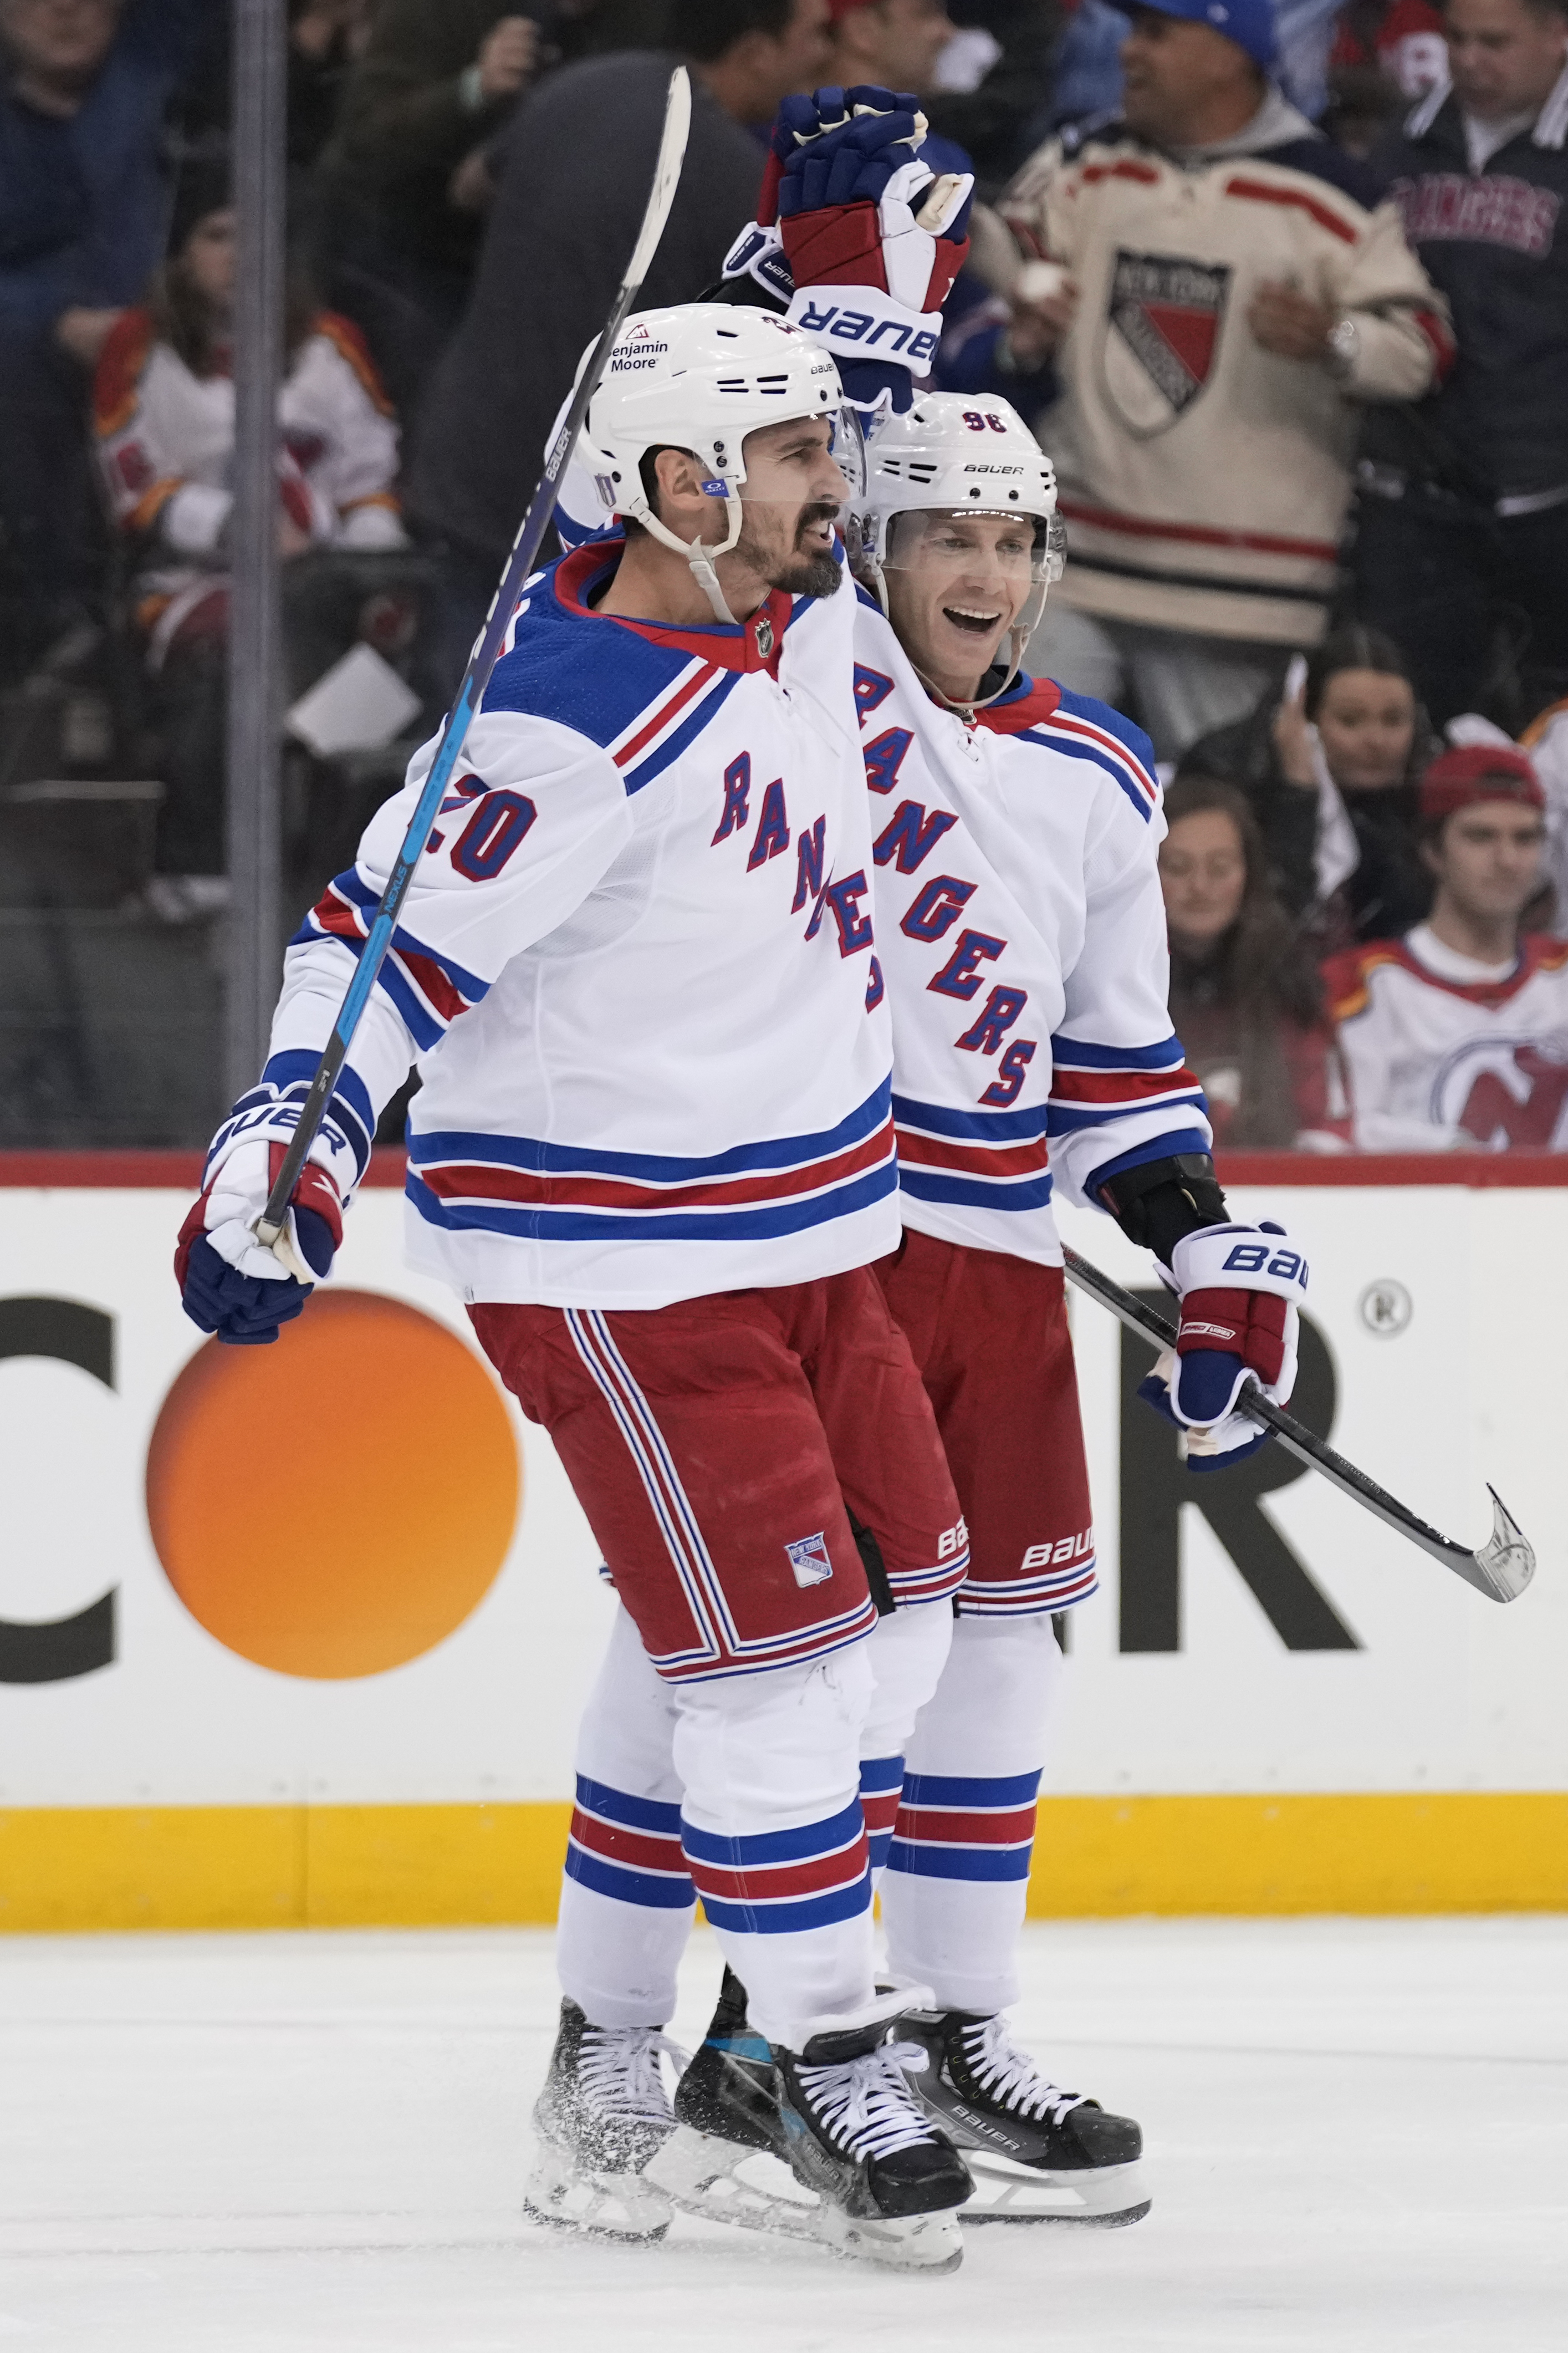 Devils look rattled (and inexperienced) in Game 1 loss to Rangers